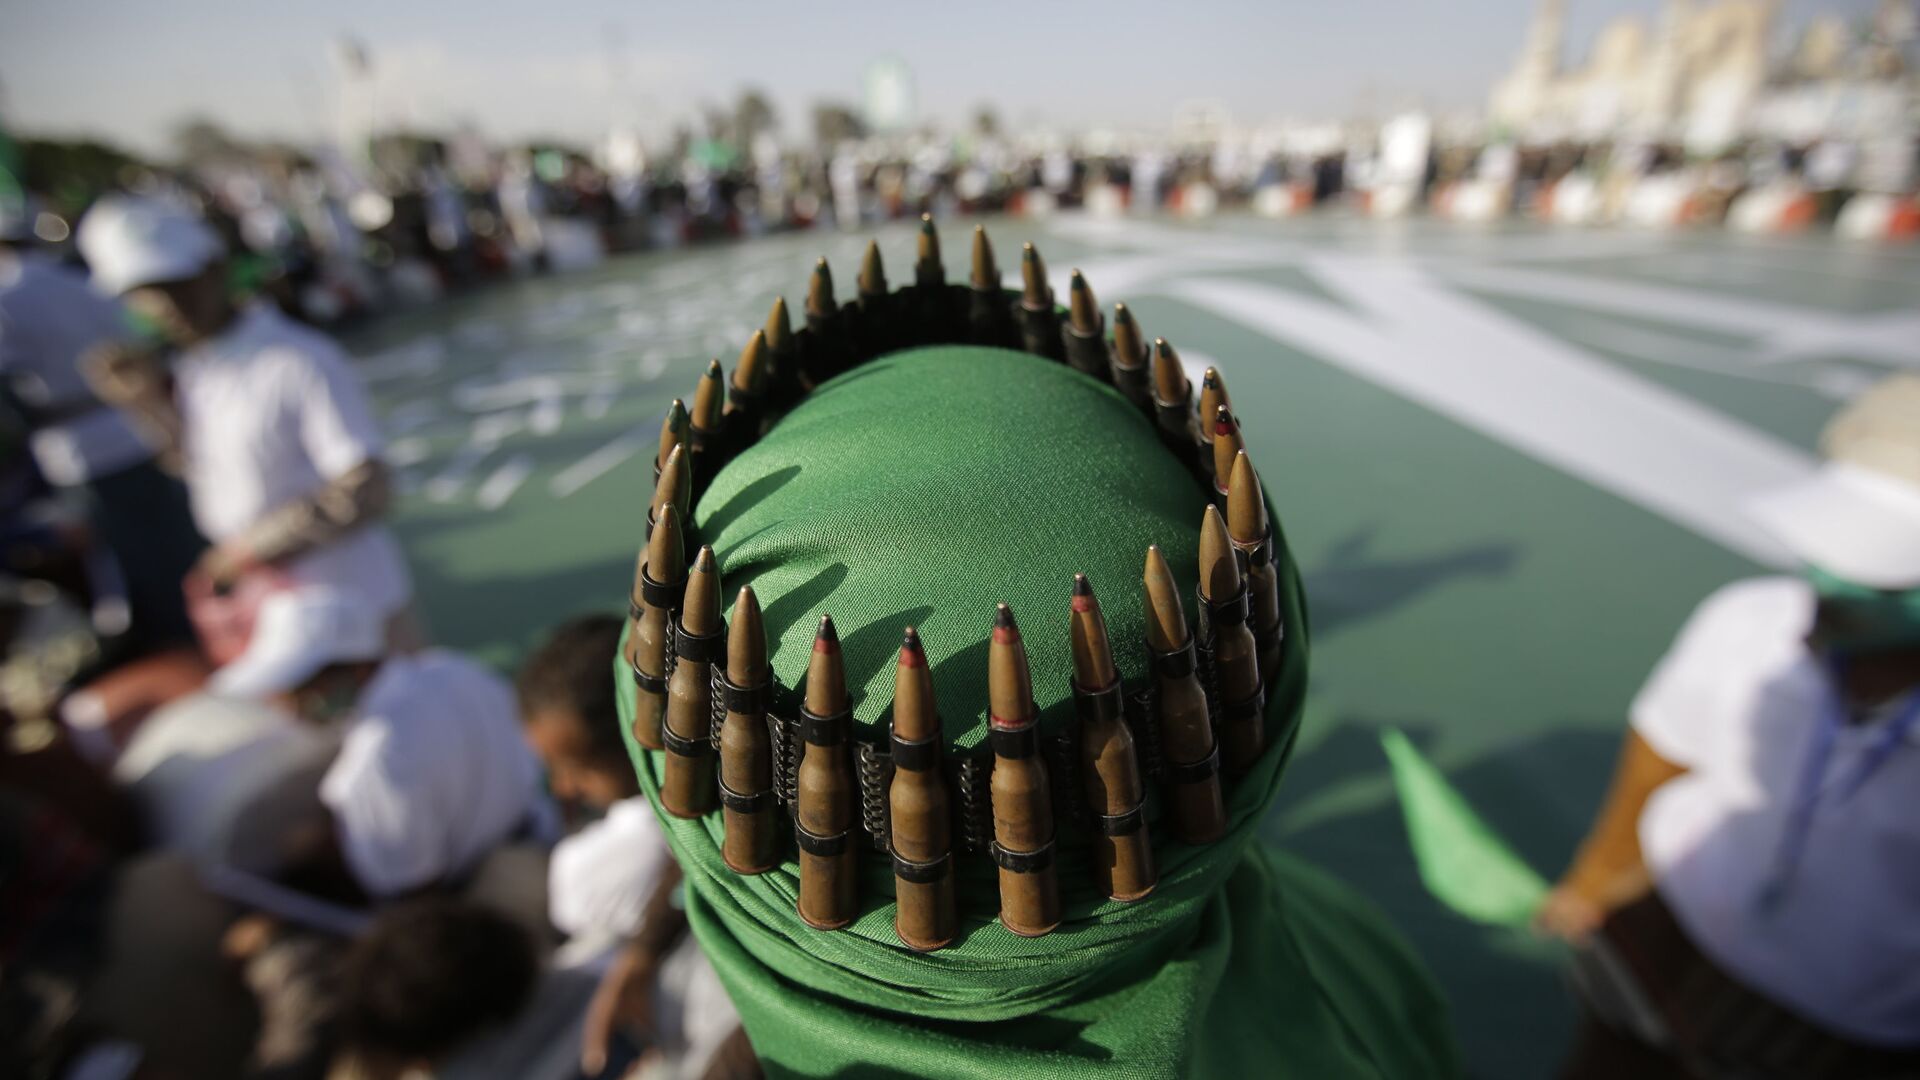 A supporter of Shiite rebels, known as Houthis, with an ammunition belt placed on his head attends a celebration of Moulid al-nabi, the birth of Islam's prophet Muhammad in Sanaa, Yemen, Saturday, Nov. 9, 2019 - Sputnik International, 1920, 18.05.2022